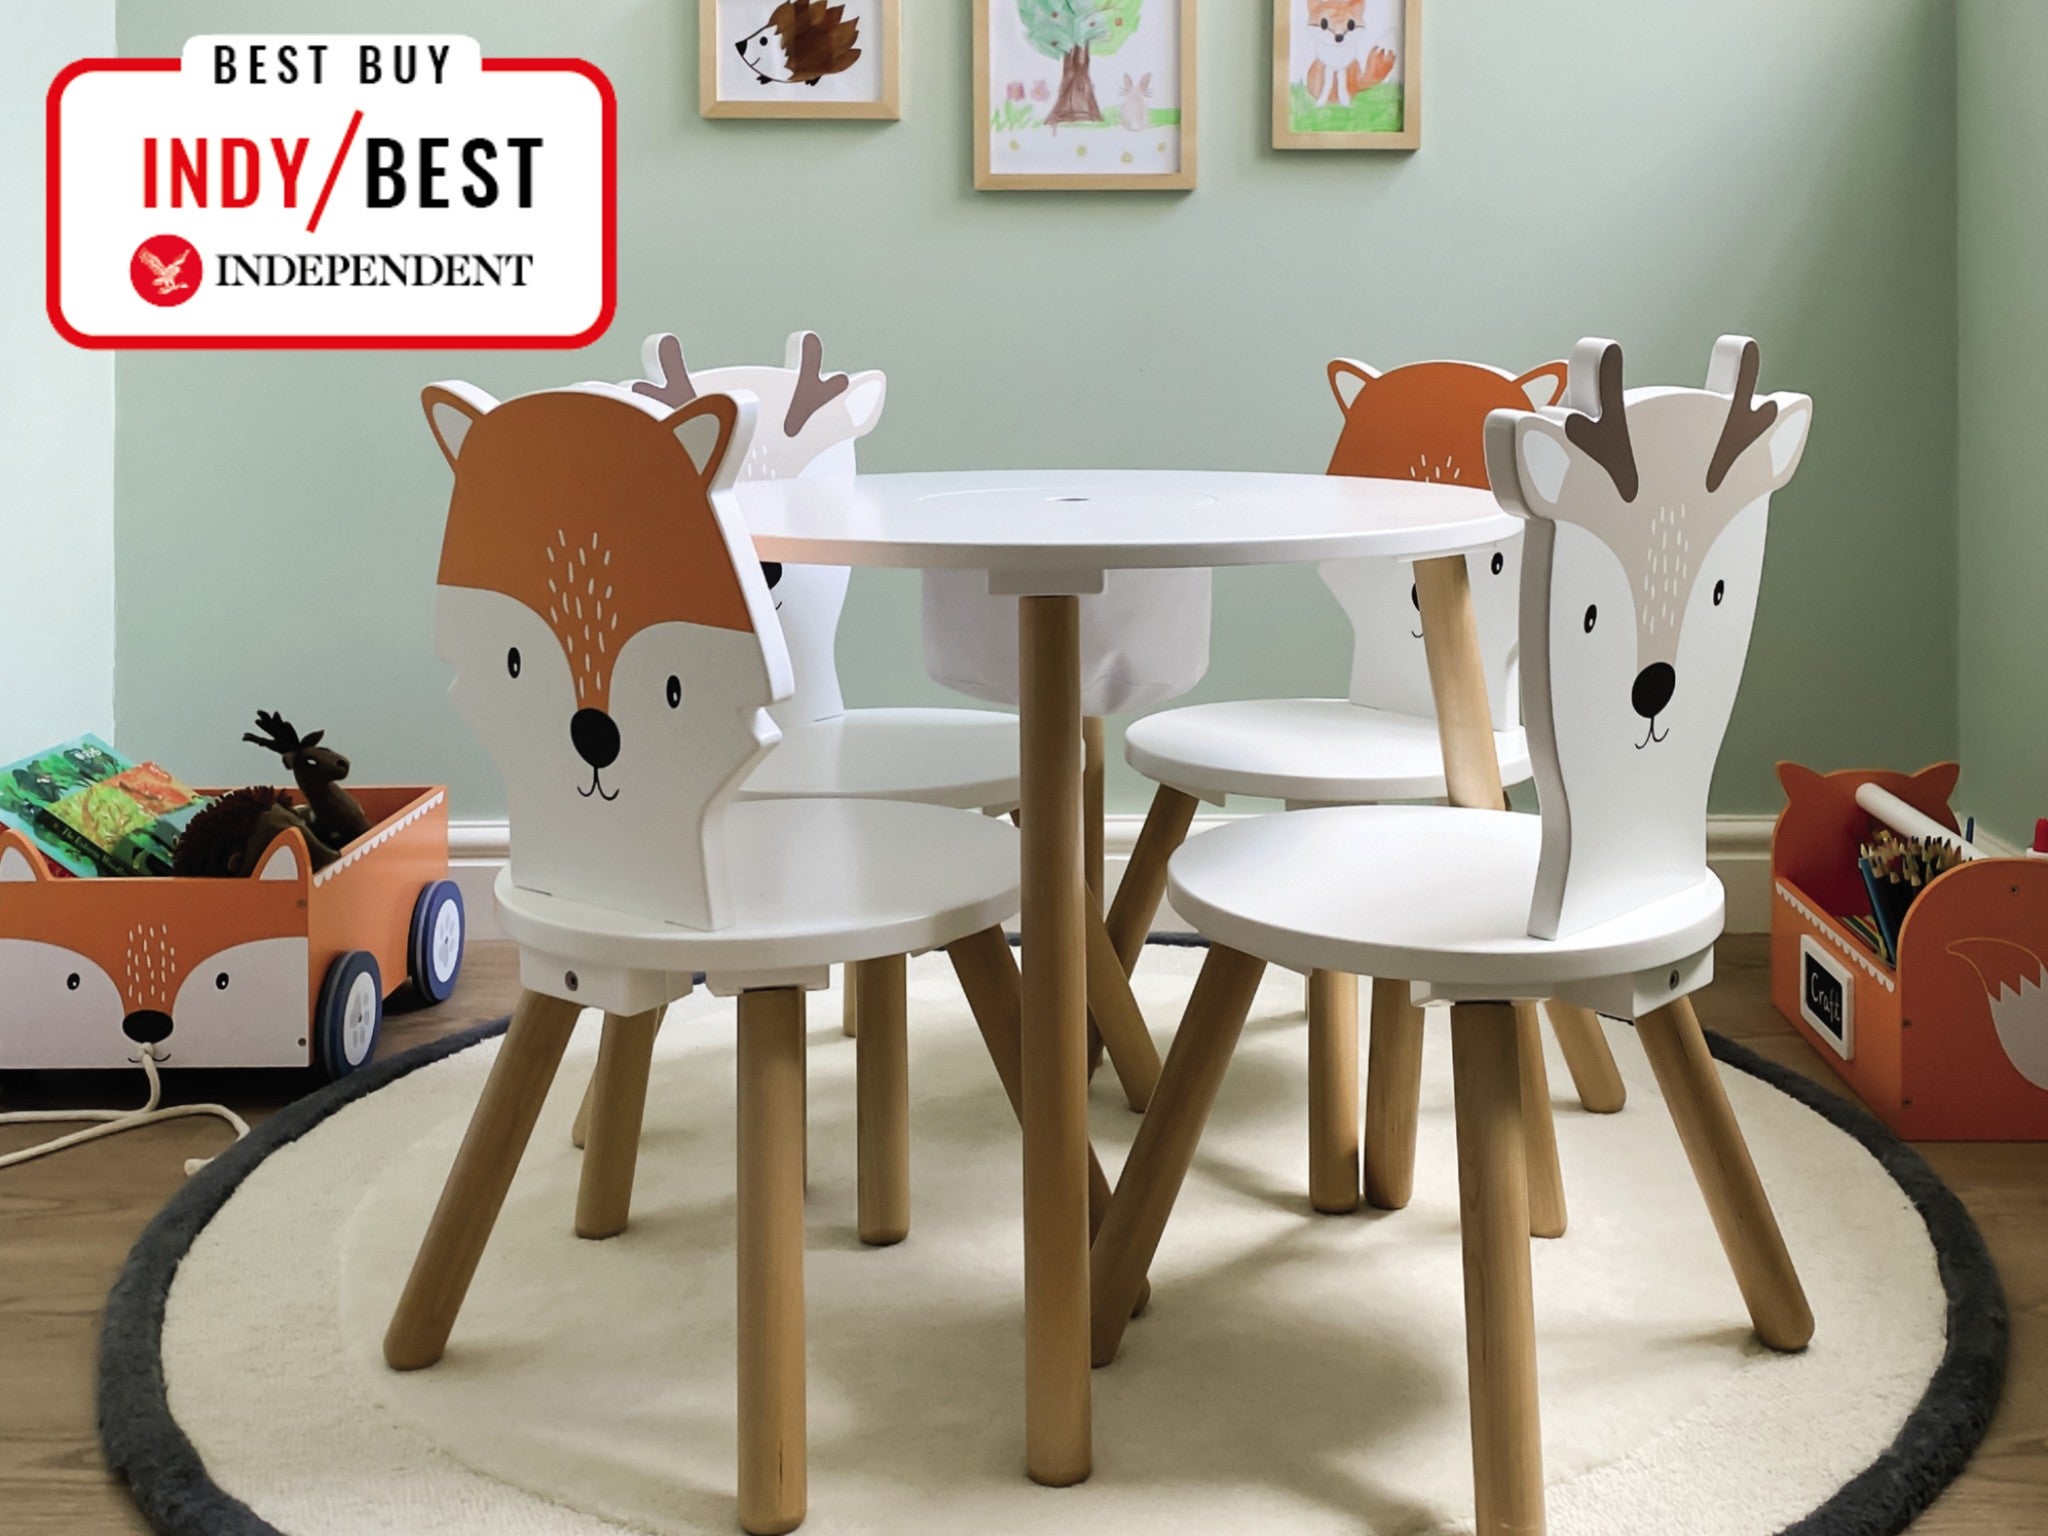 Childrens Kids Wooden Table and Chairs Nursery Sets Indoor Use Unisex Best Gift 